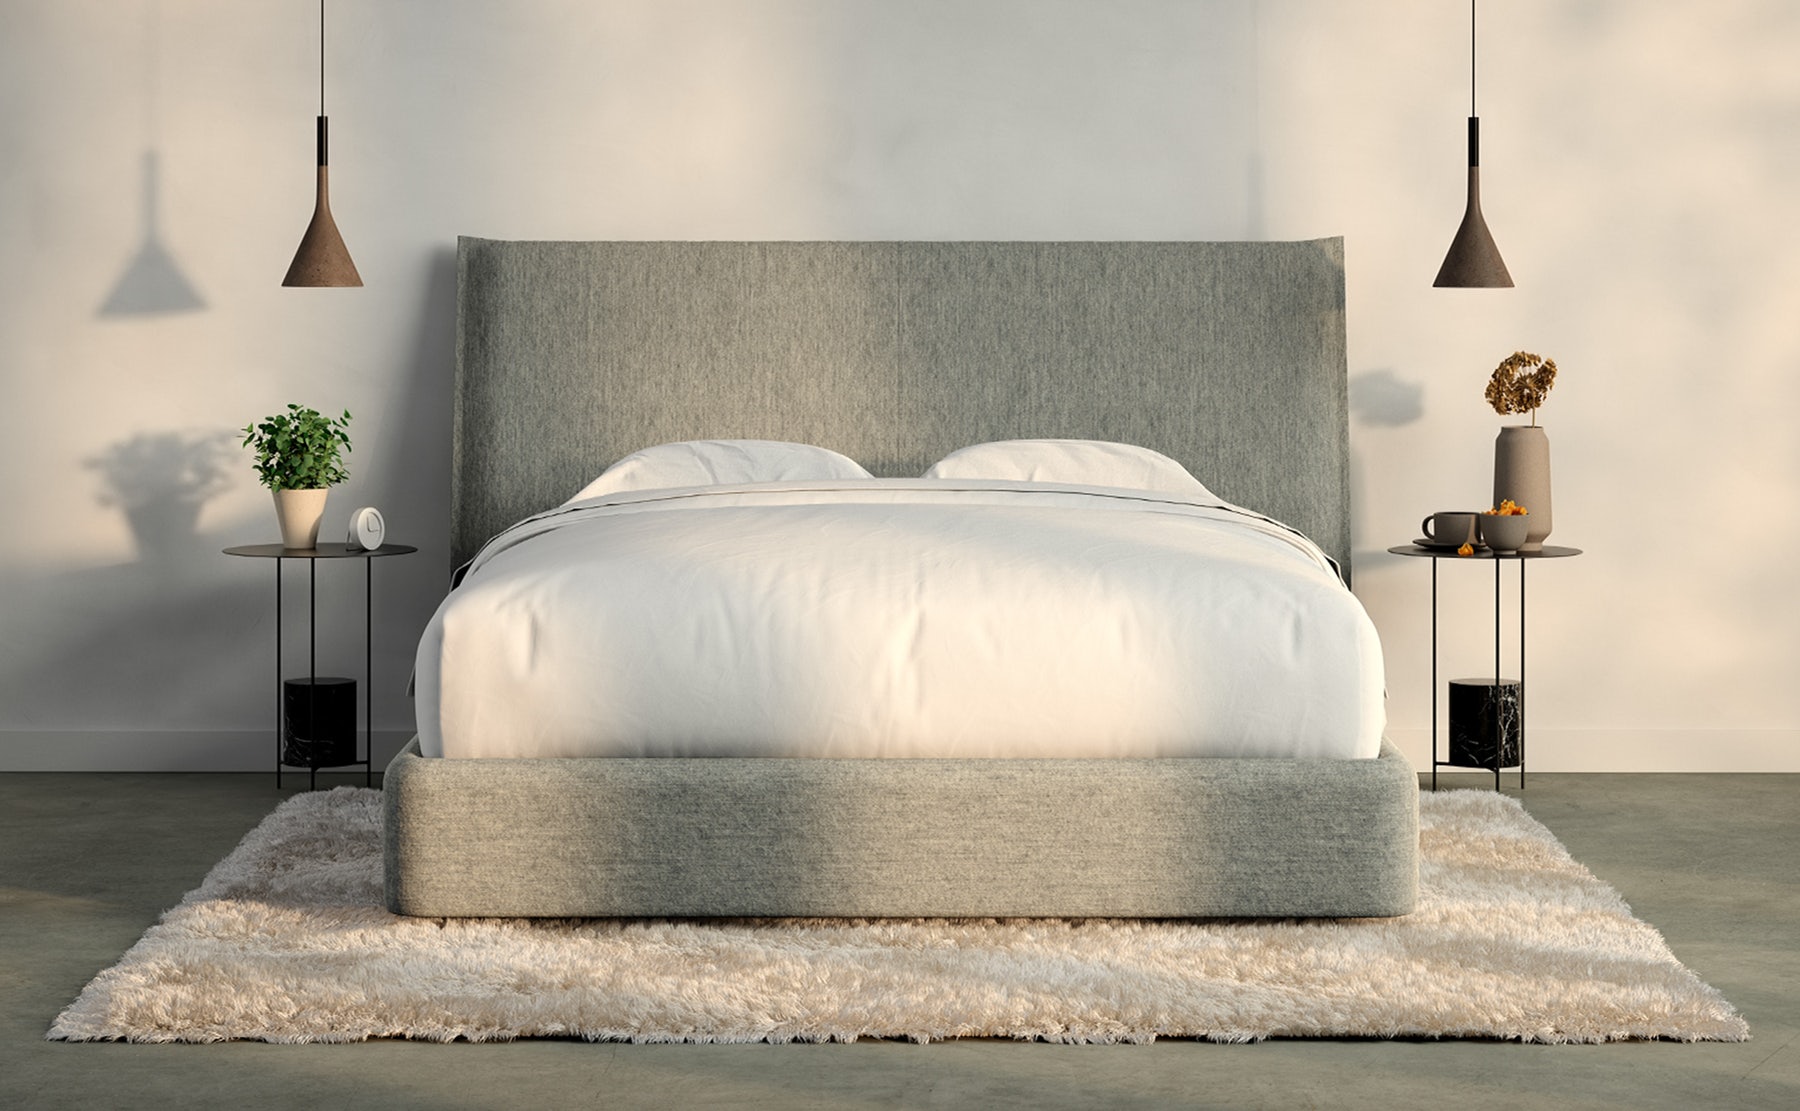 Mattress Sizes And Bed Dimensions Guide, Difference Between King And California King Bed Frame